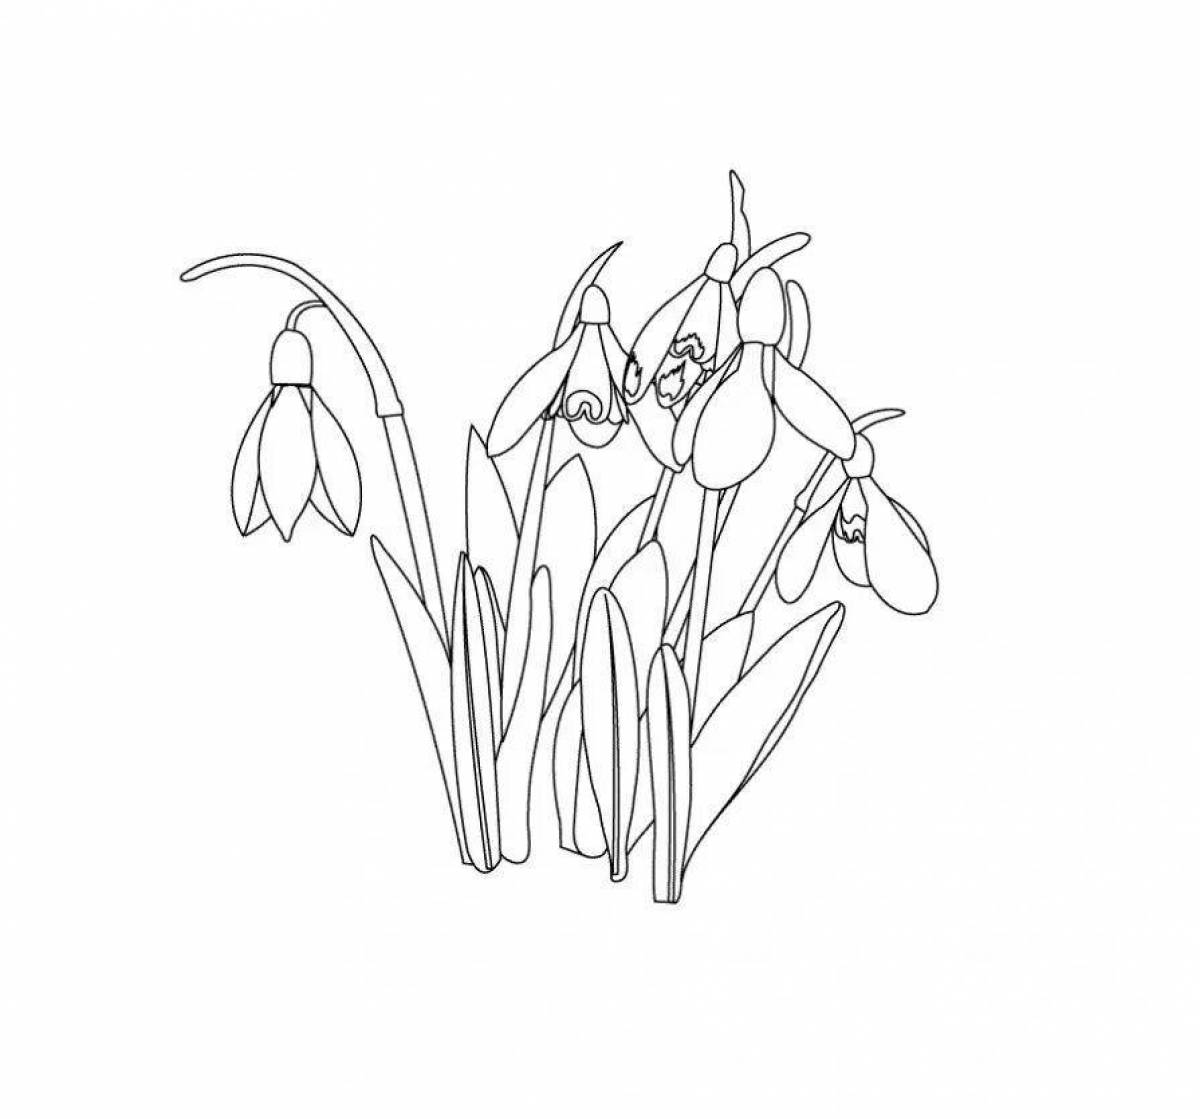 Snowdrops for kids #2